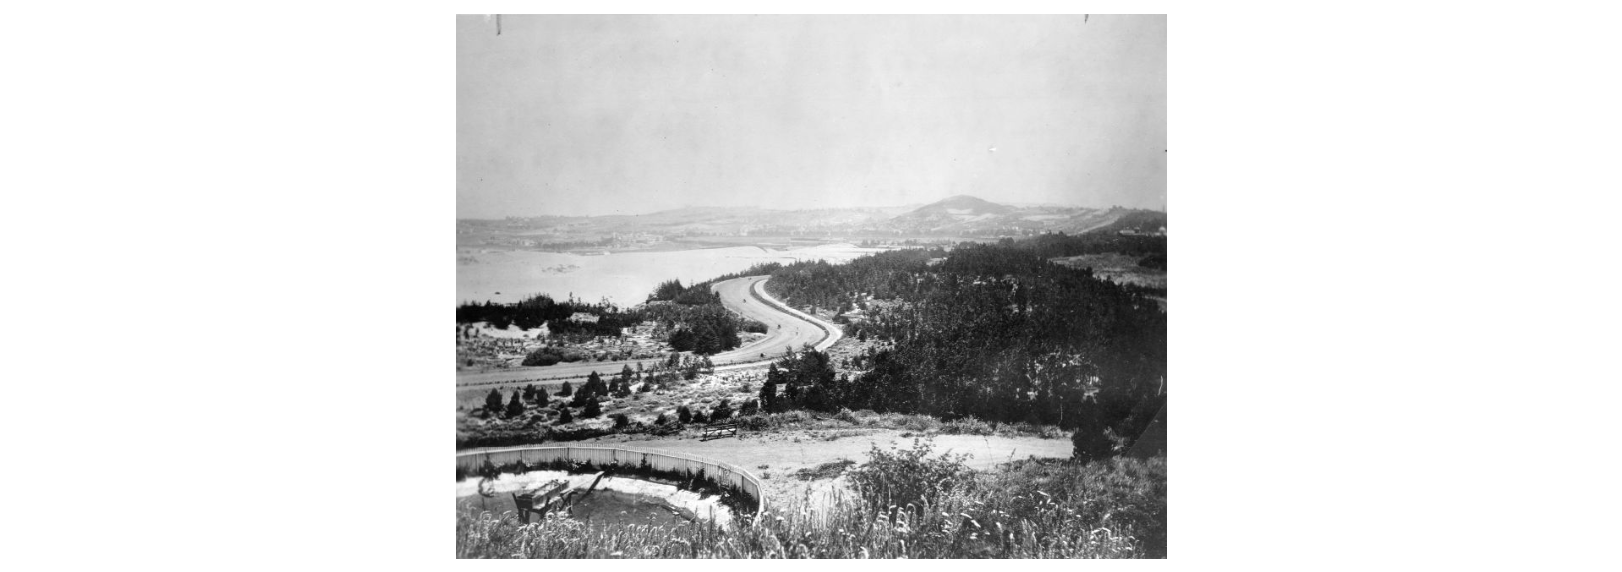 Black and white photo shows rolling sandy hills with grasses and low shrubs. A road winds off into the distance.